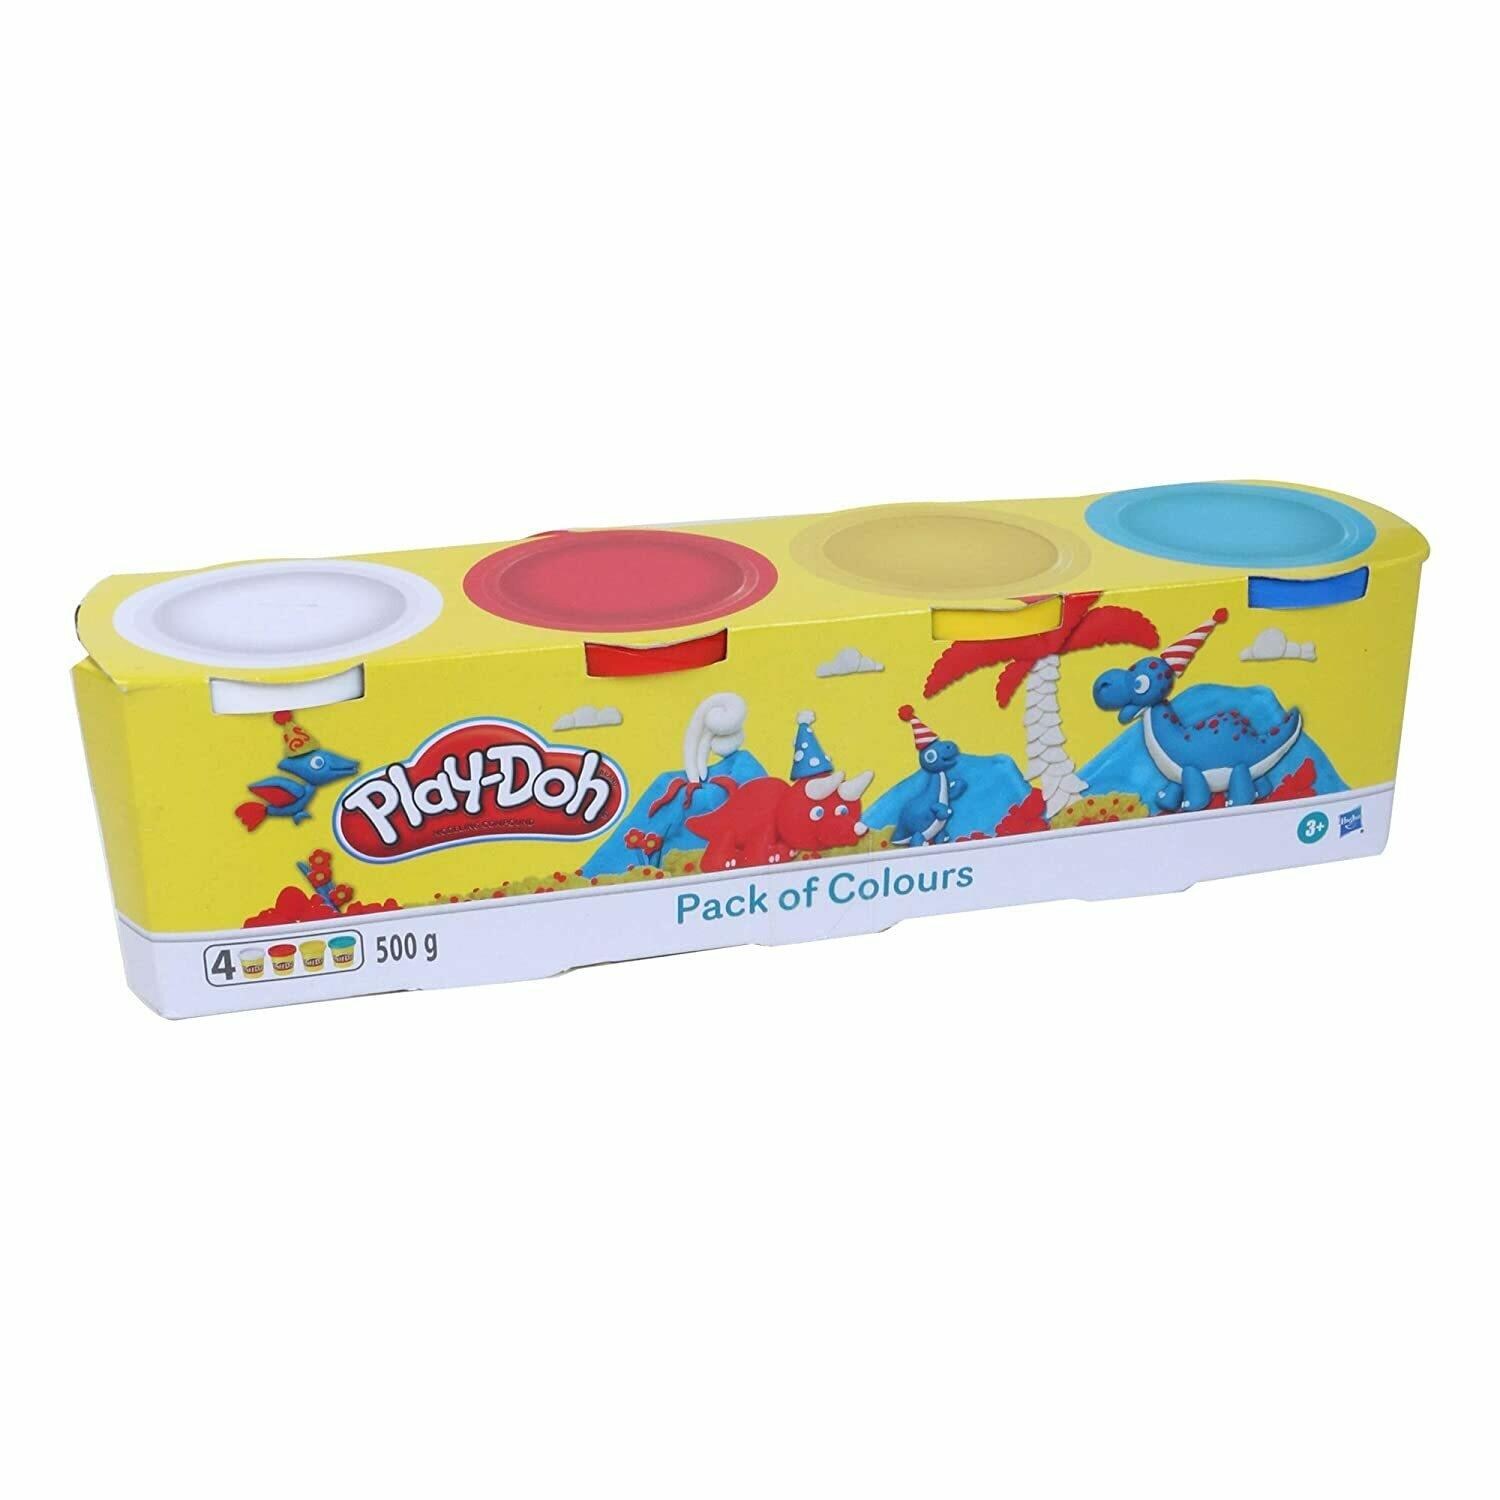 Assorted Colours Play-doh 4 Tub/Can Pack Kids Modelling Dough 